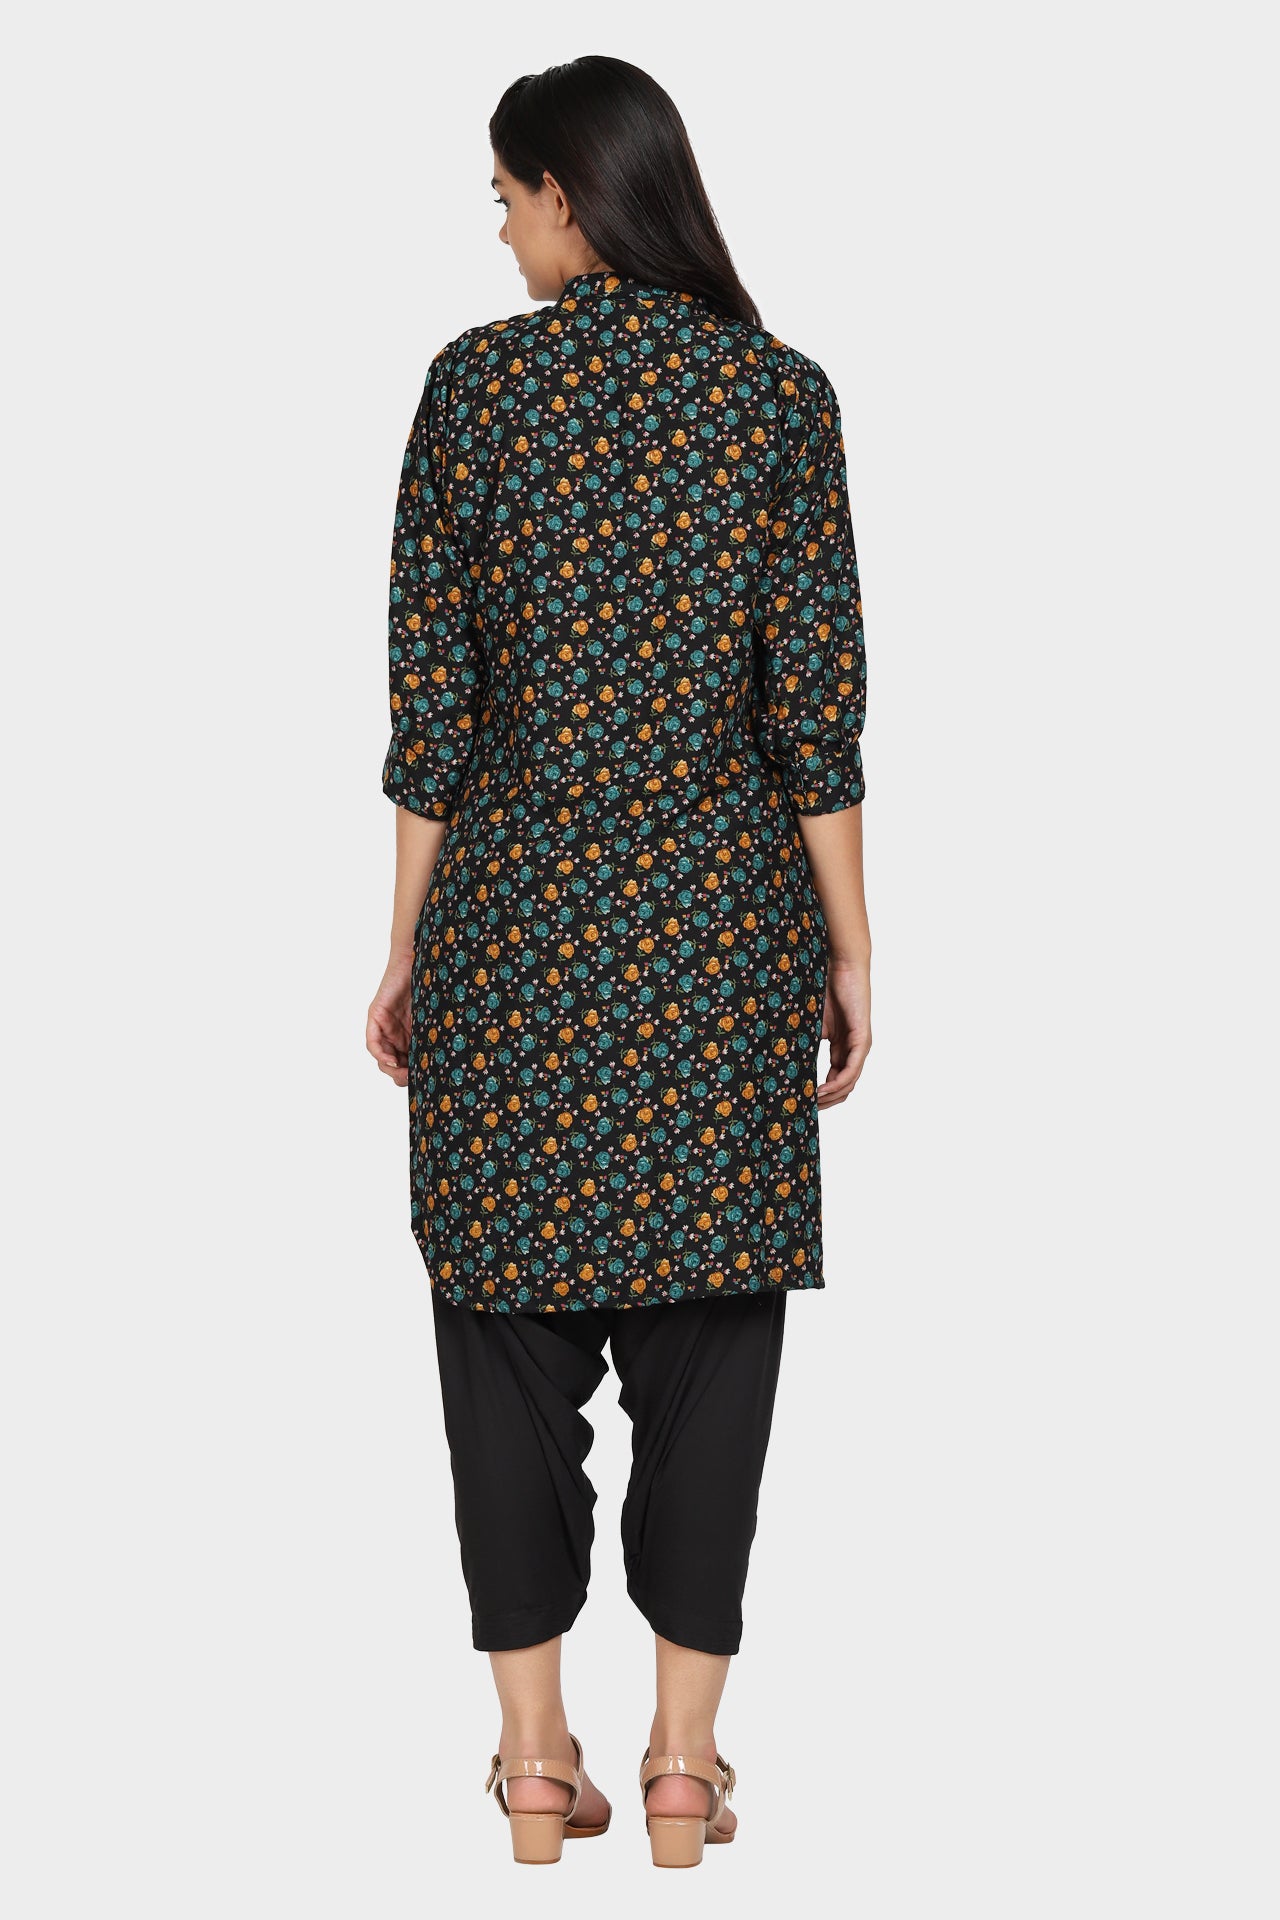 Black Floral Print Blended Kurta with Ethnic Lace Detailing